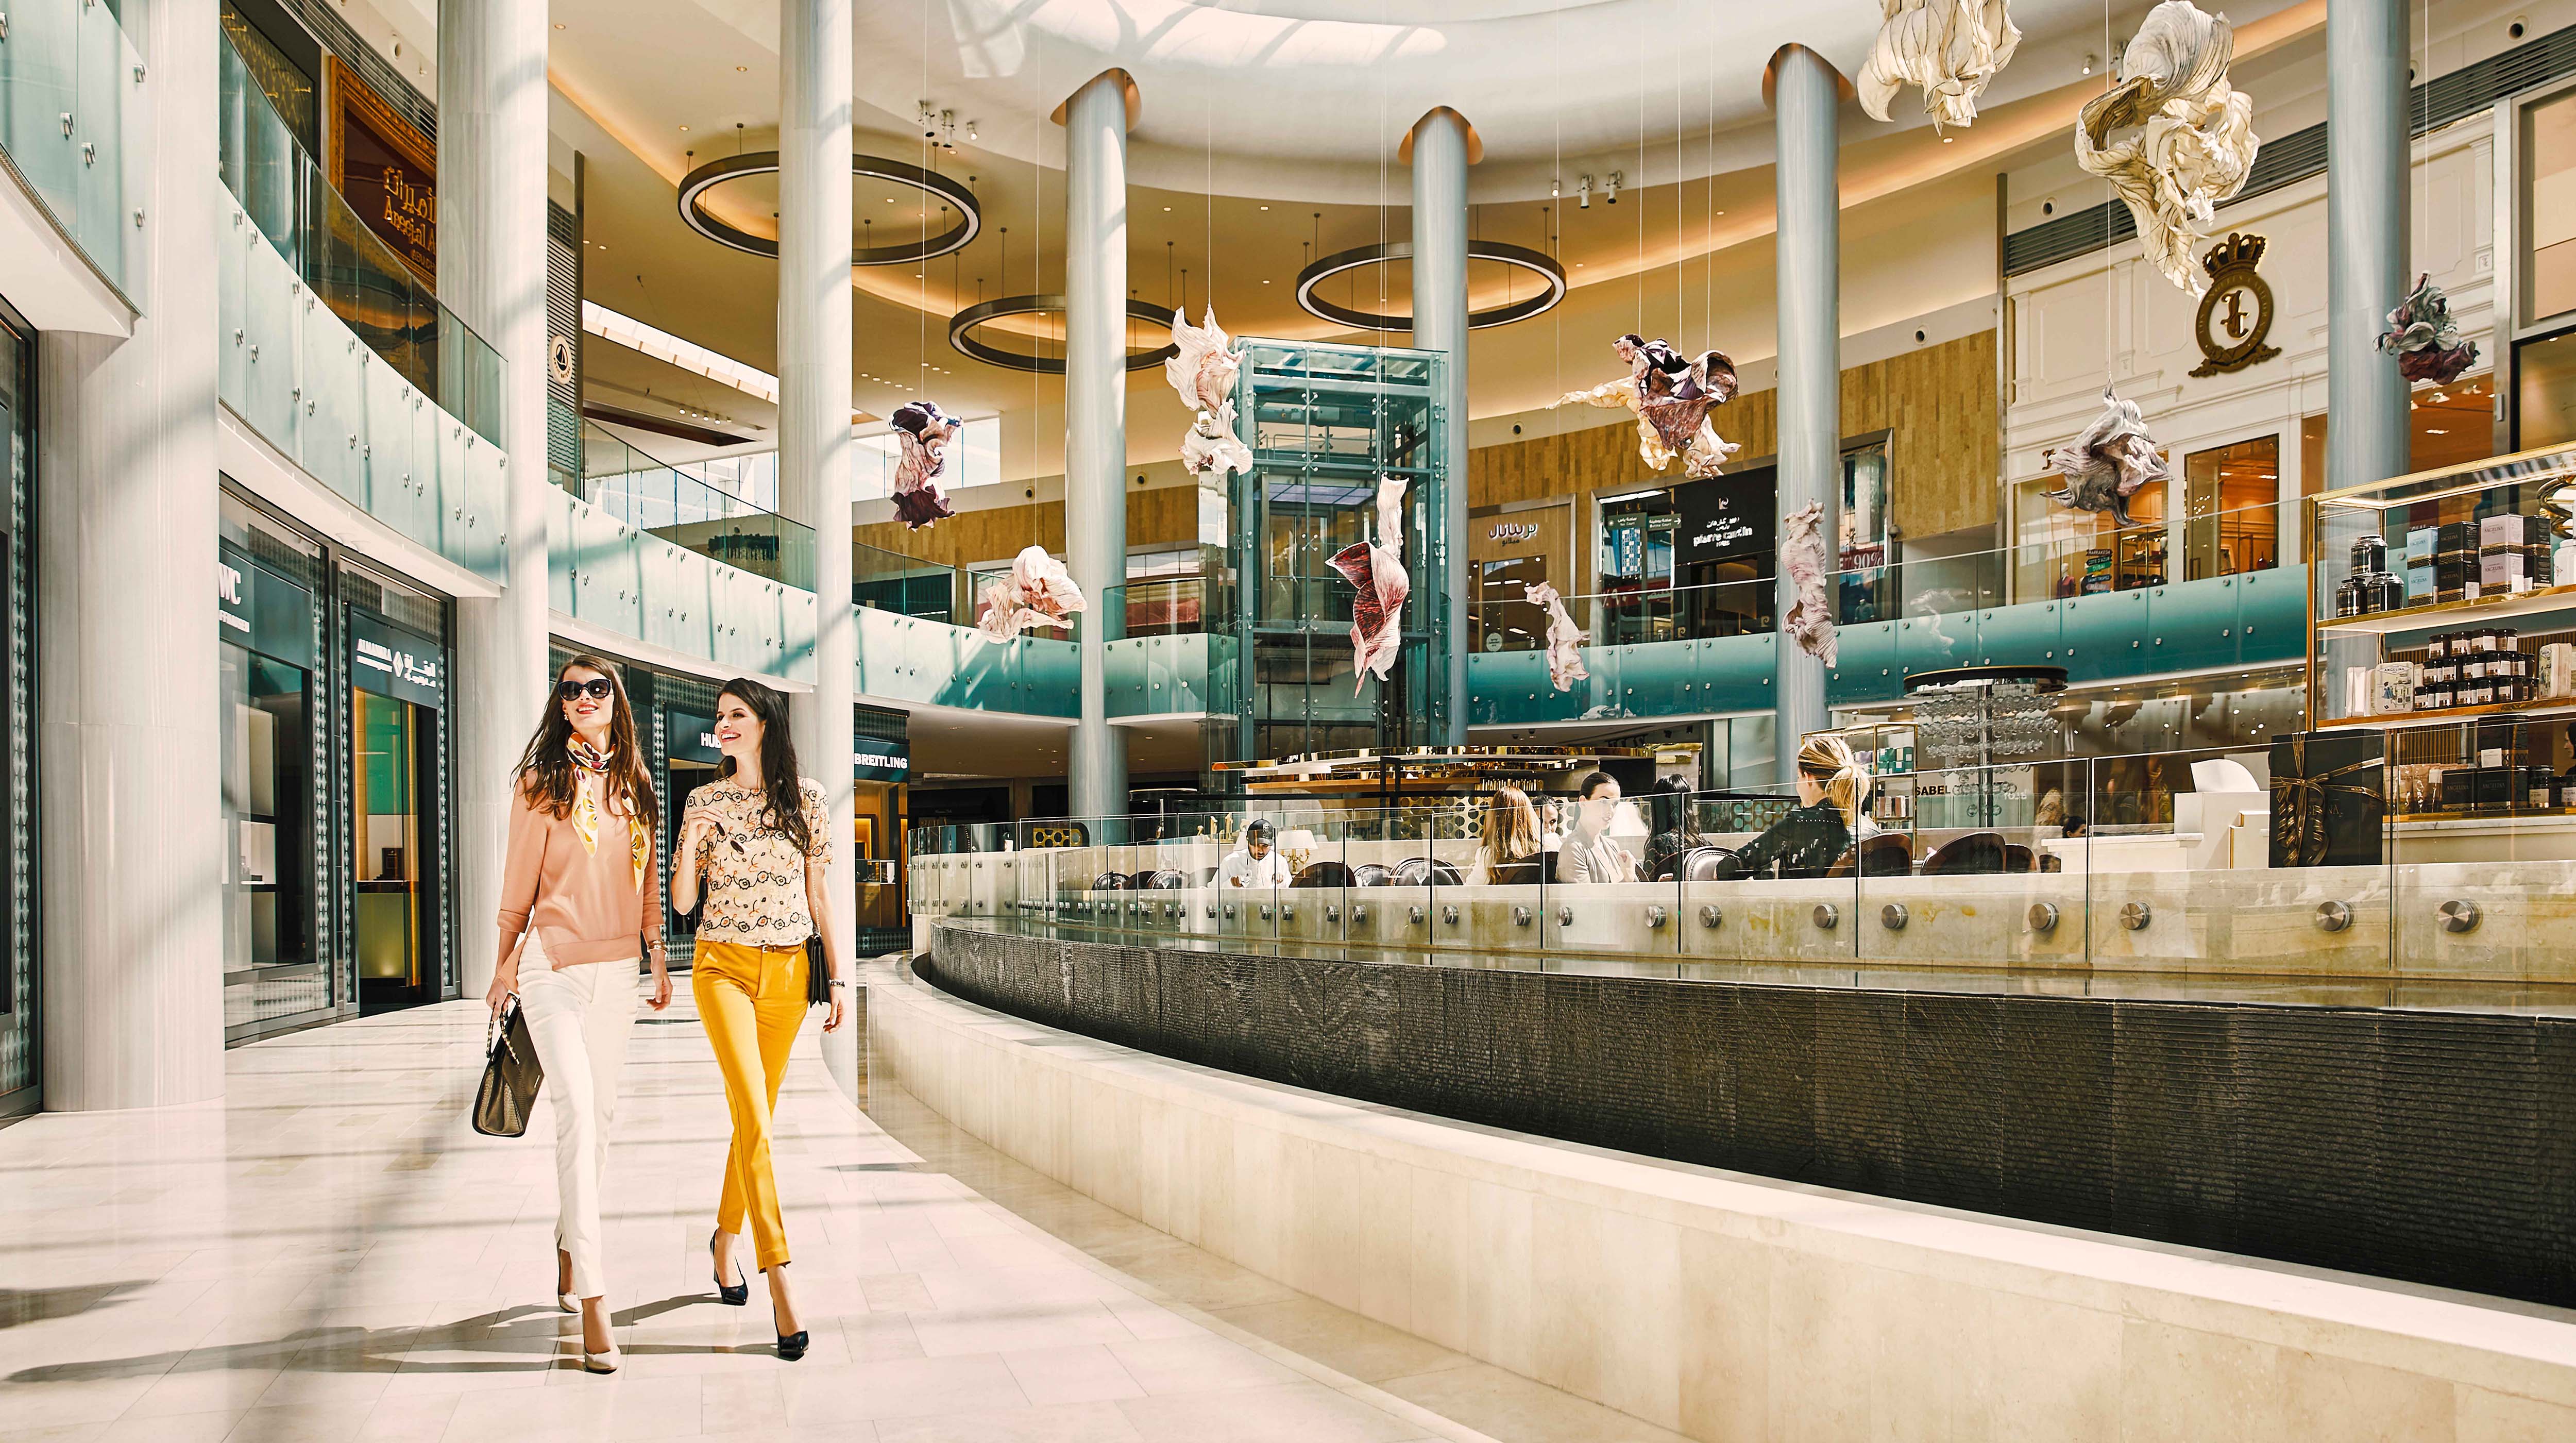 Due donne nel centro commerciale Yas Mall ad Abu Dhabi.